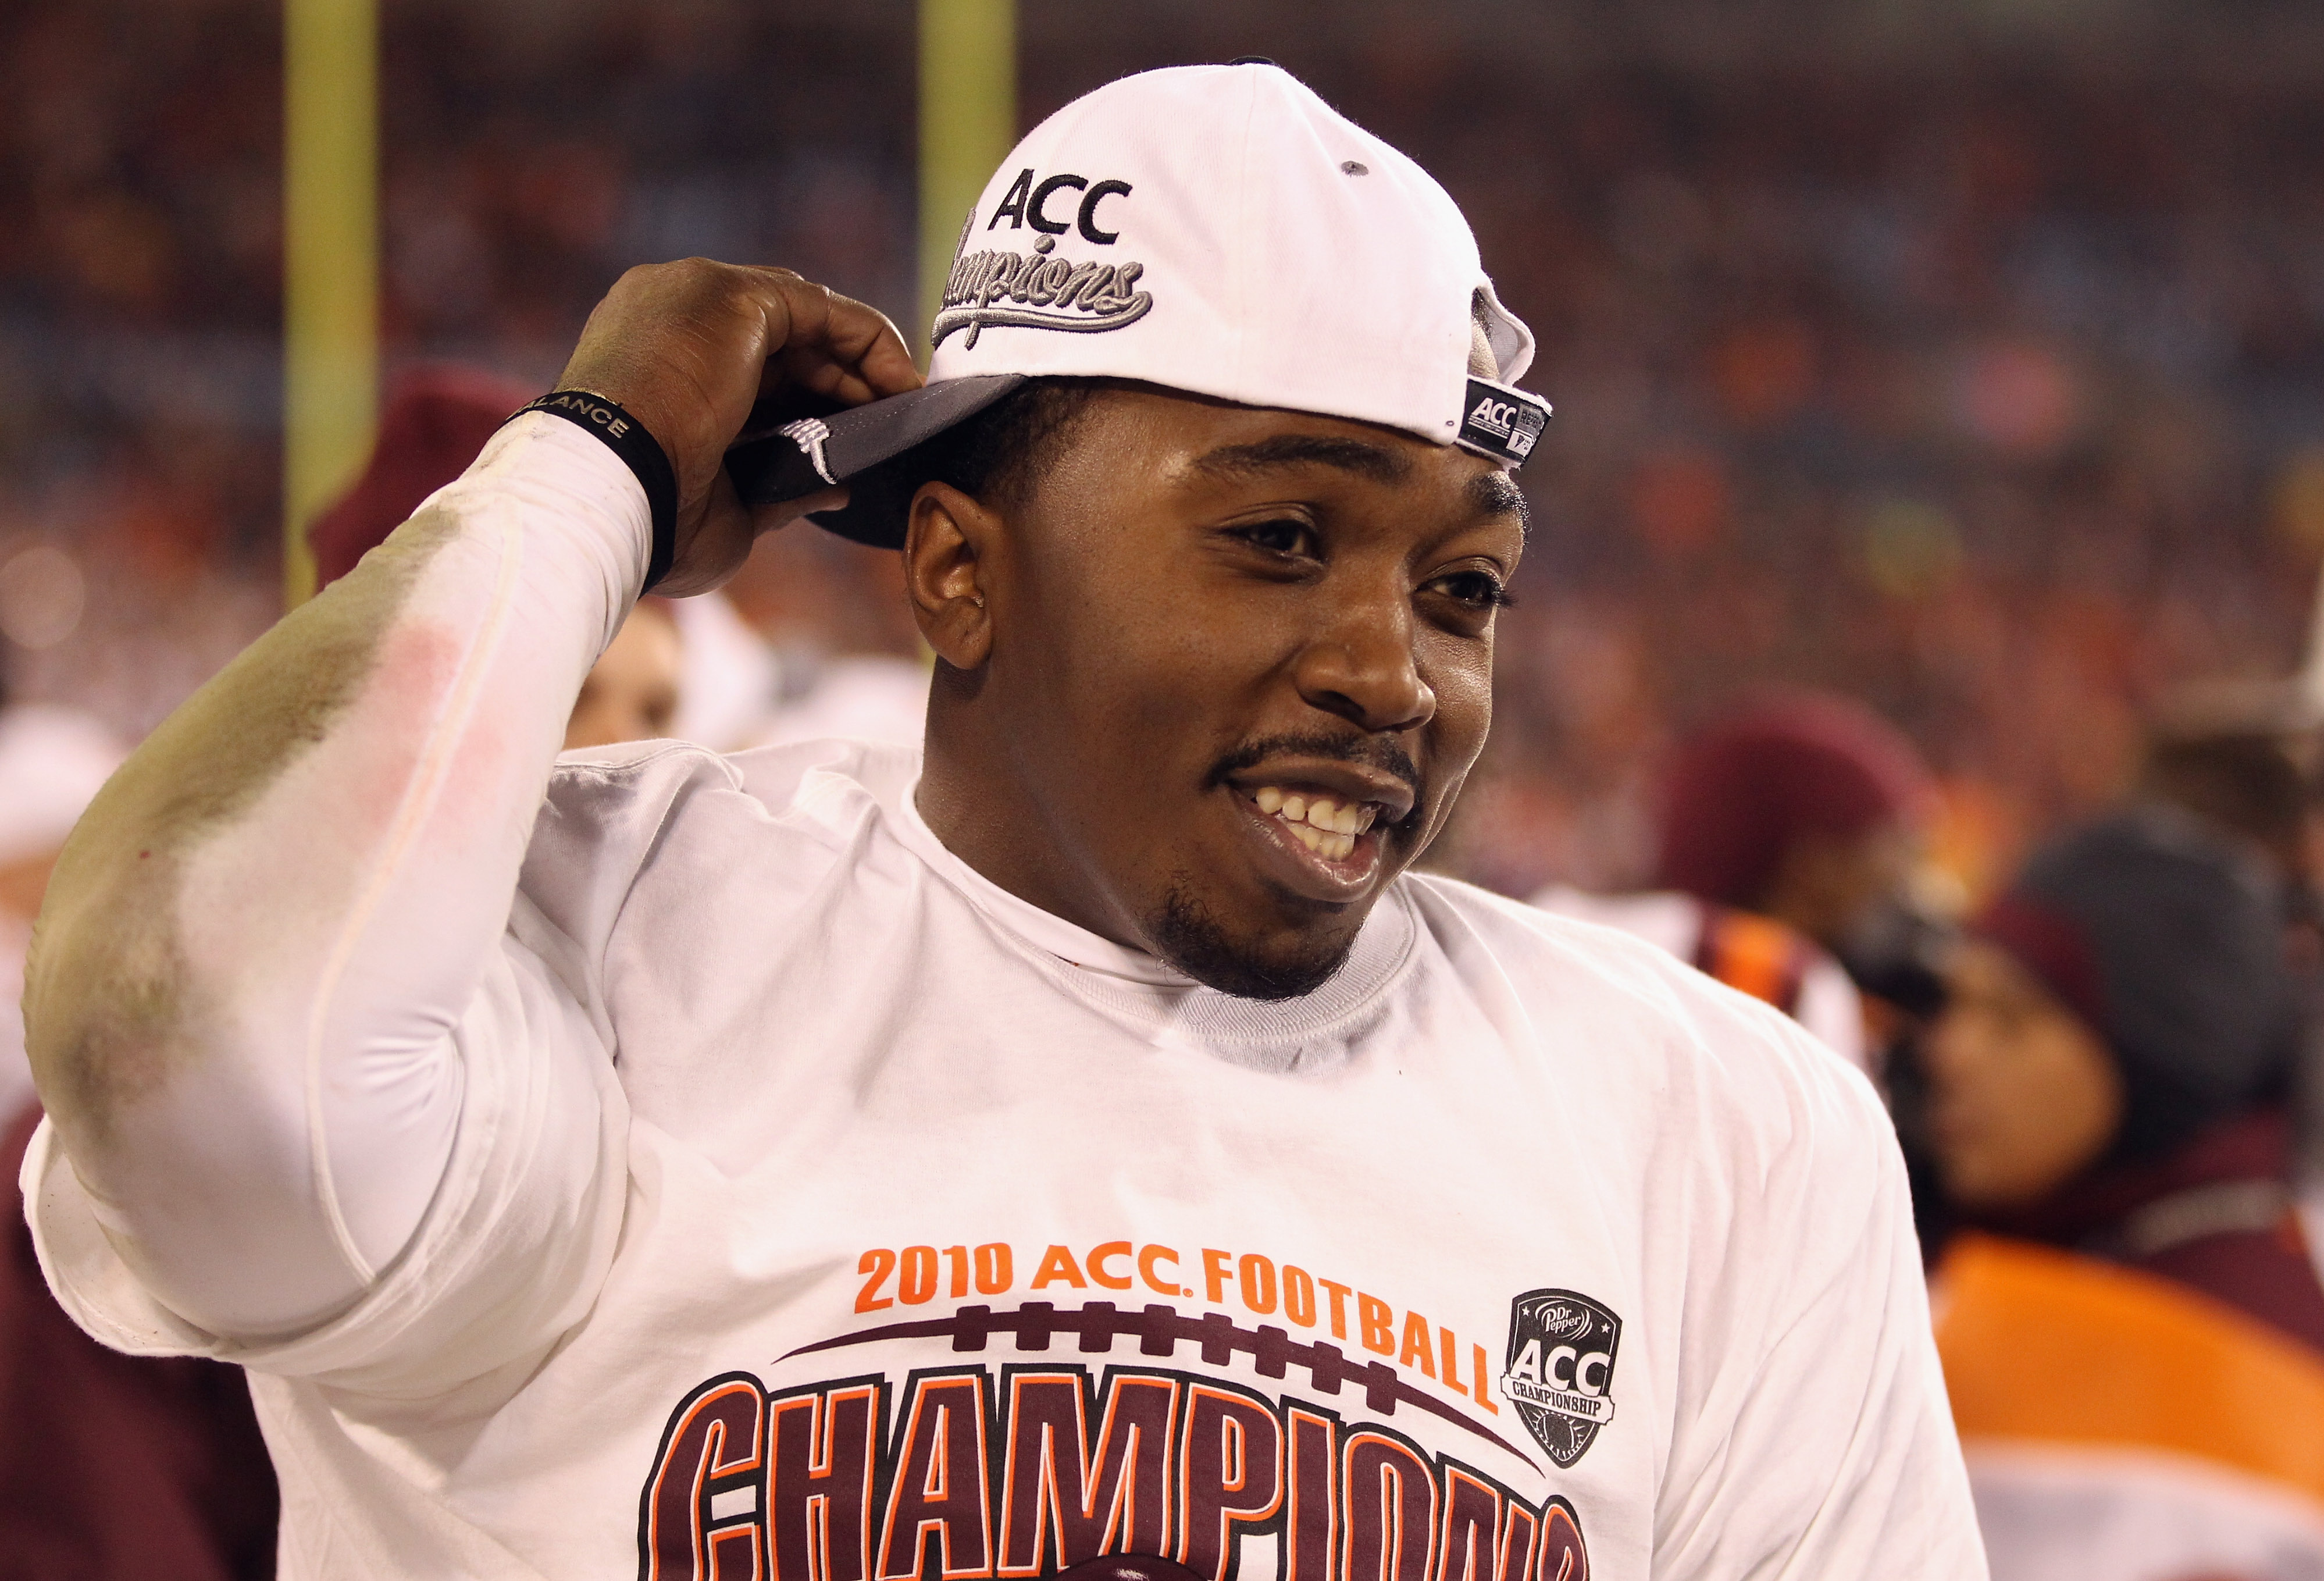 CHARLOTTE, NC - DECEMBER 04:  Tyrod Taylor #5 of the Virginia Tech Hokies celebrates after defeating the Florida State Seminoles on their way to winning the ACC Championship 44-33 at Bank of America Stadium on December 4, 2010 in Charlotte, North Carolina